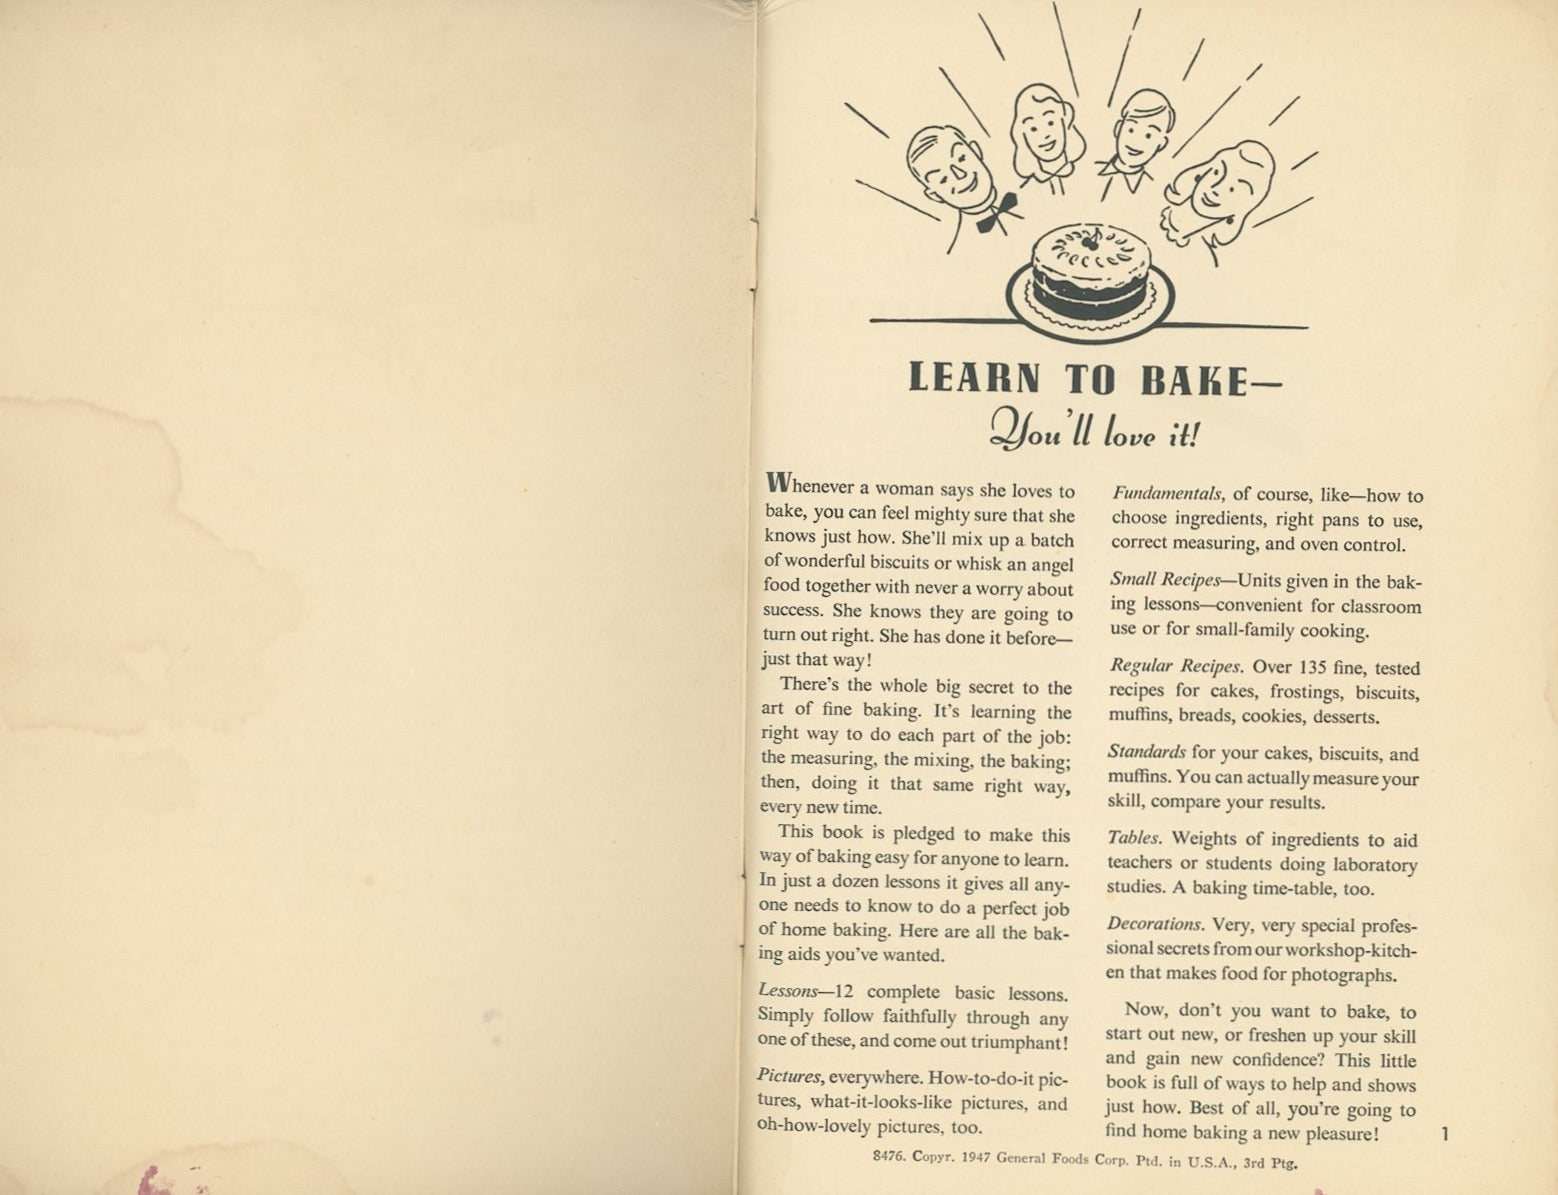 LEARN TO BAKE...YOU'LL LOVE IT Vintage Recipe Booklet Circa 1947